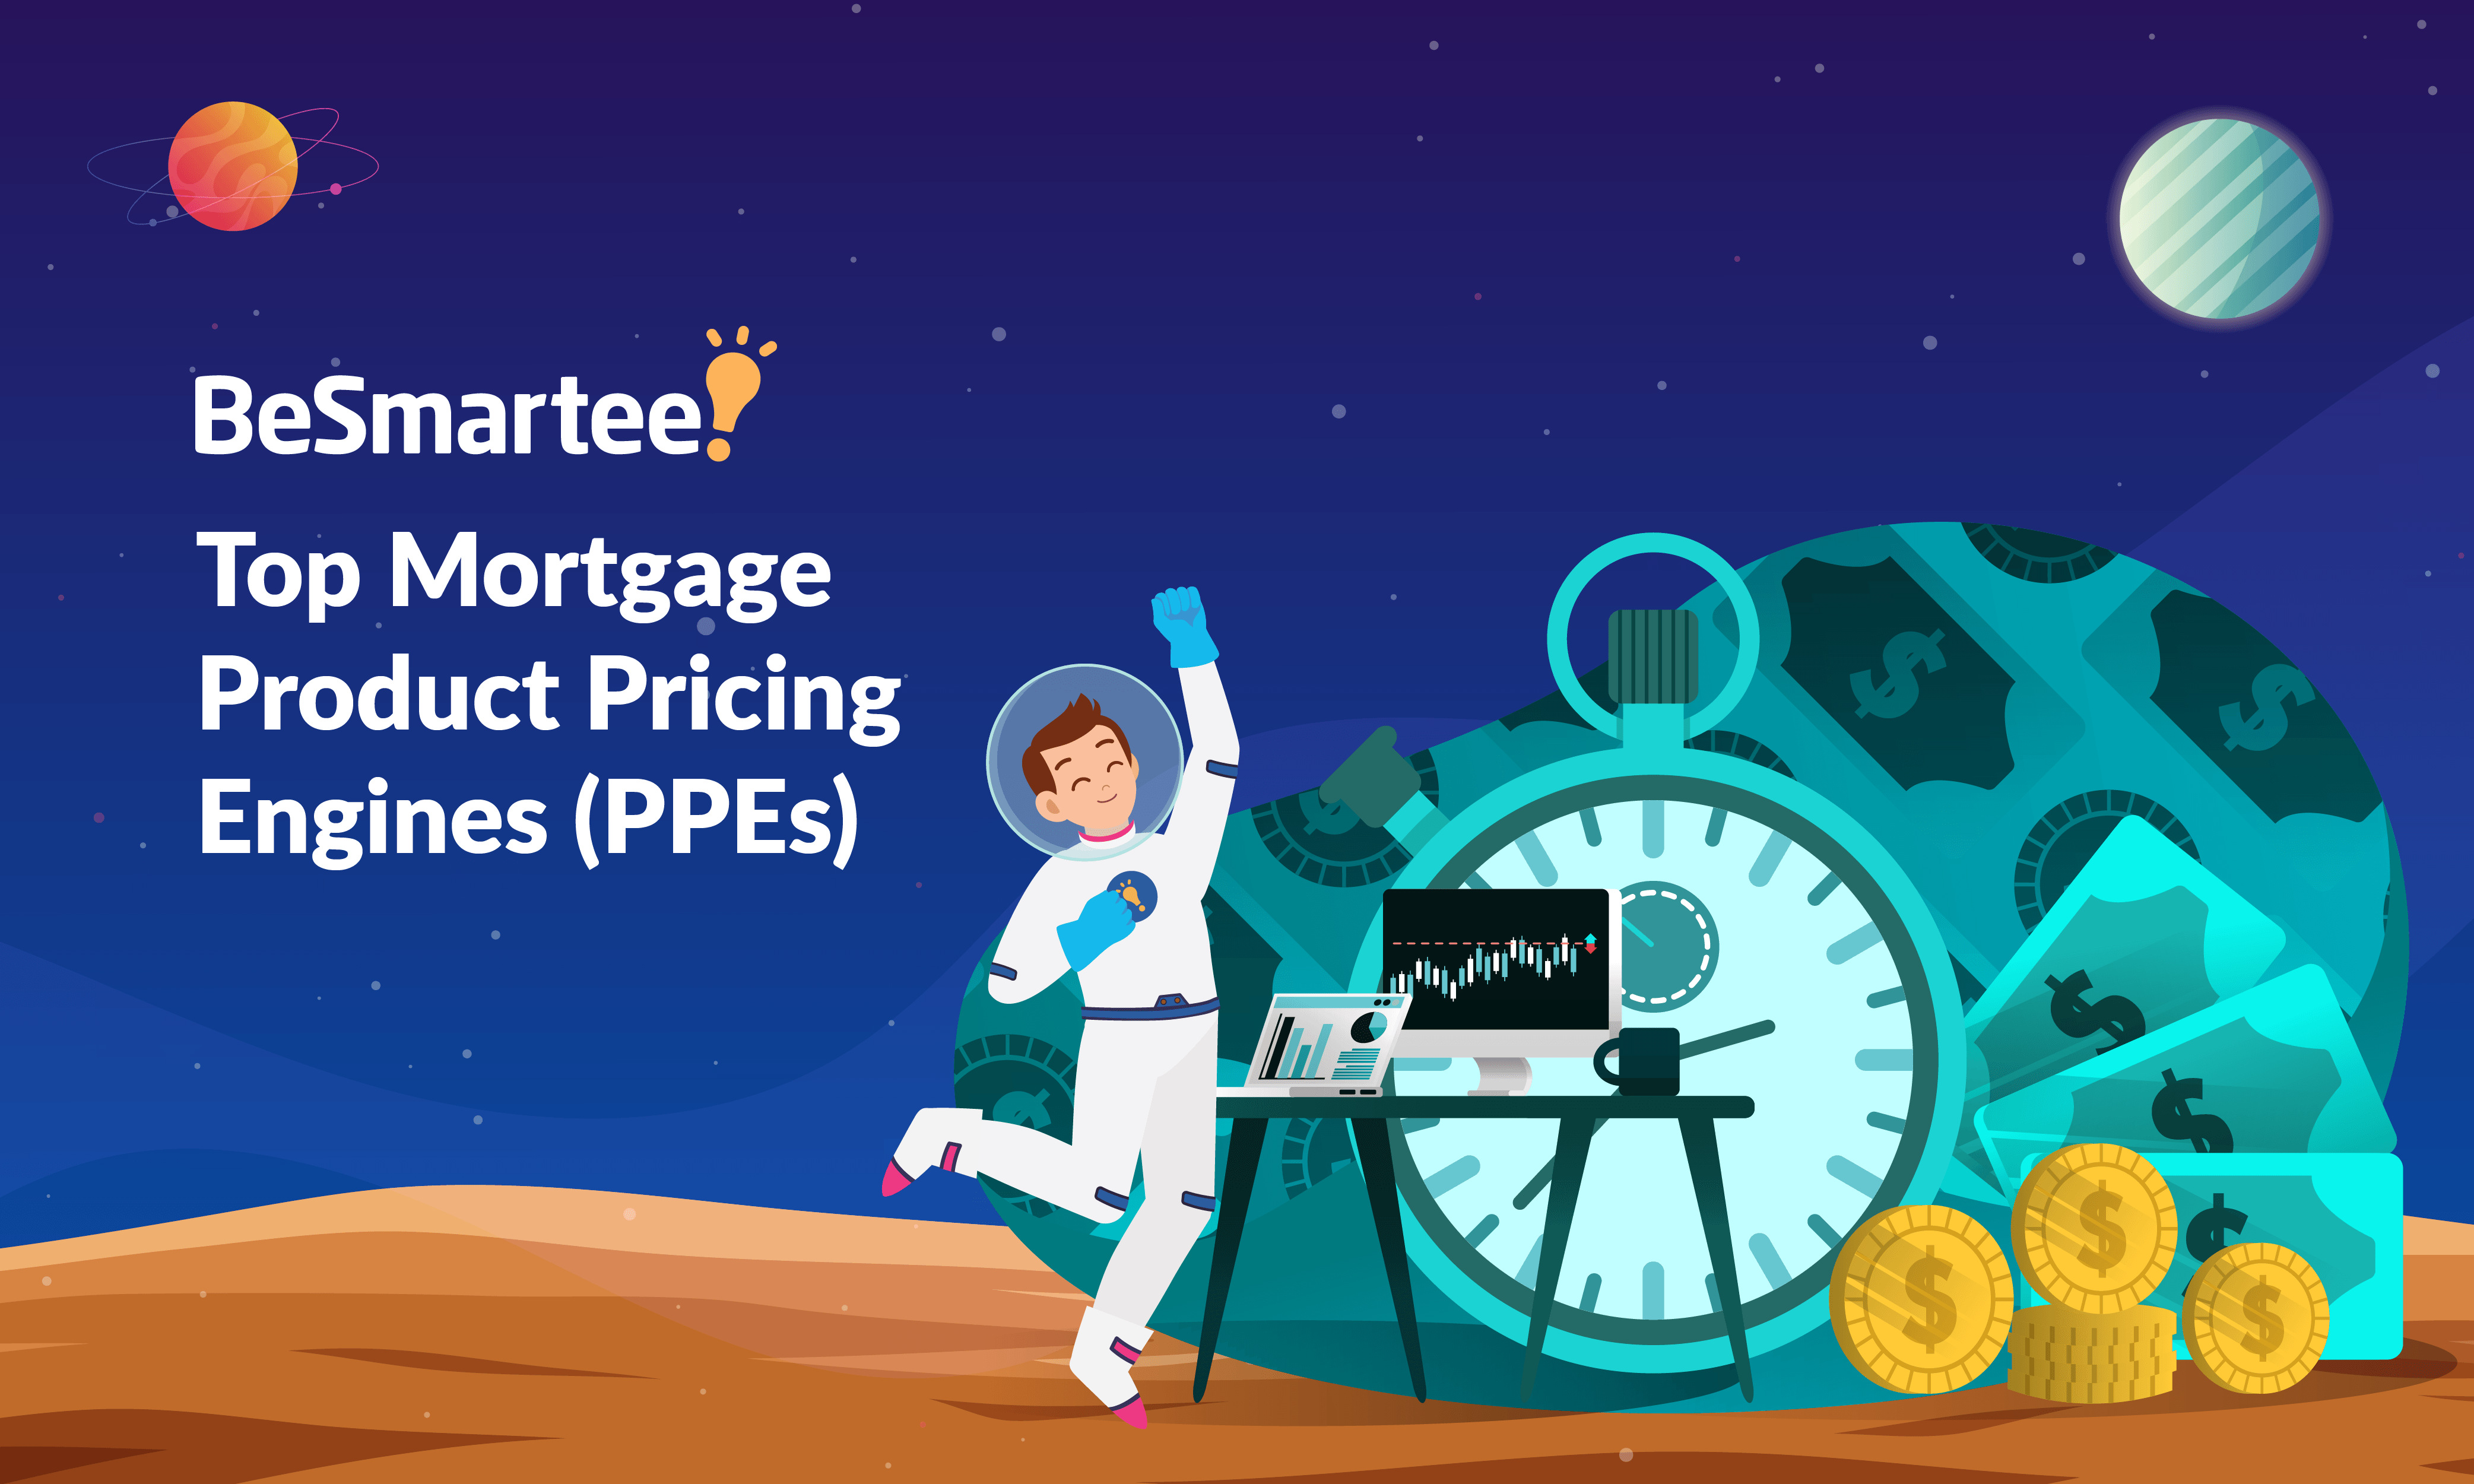 Top Mortgage Product Pricing Engines (PPEs)